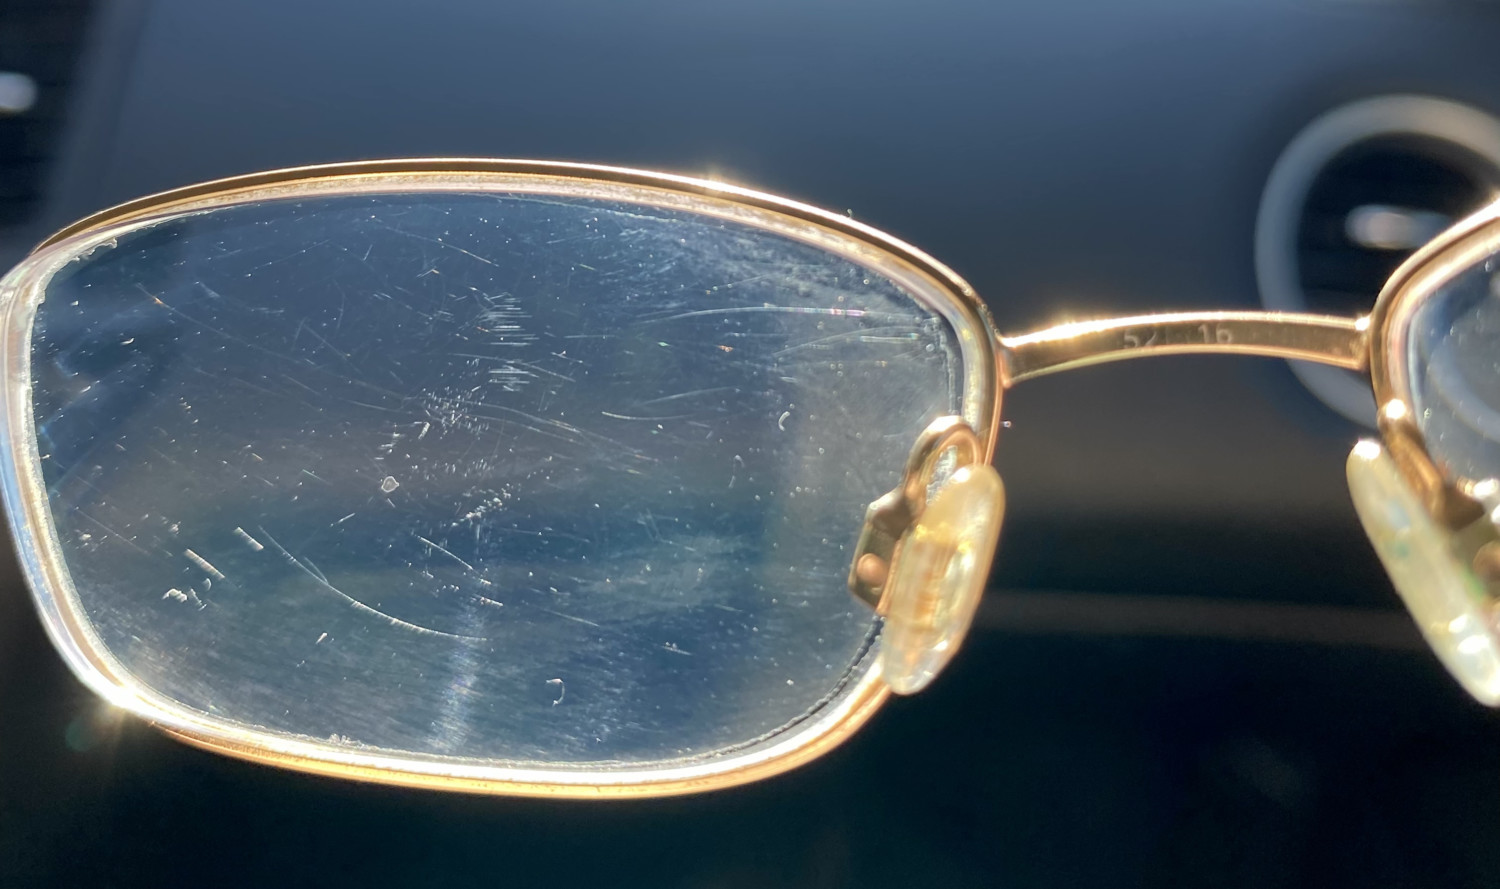 How to fix scratched glasses: myths and tips